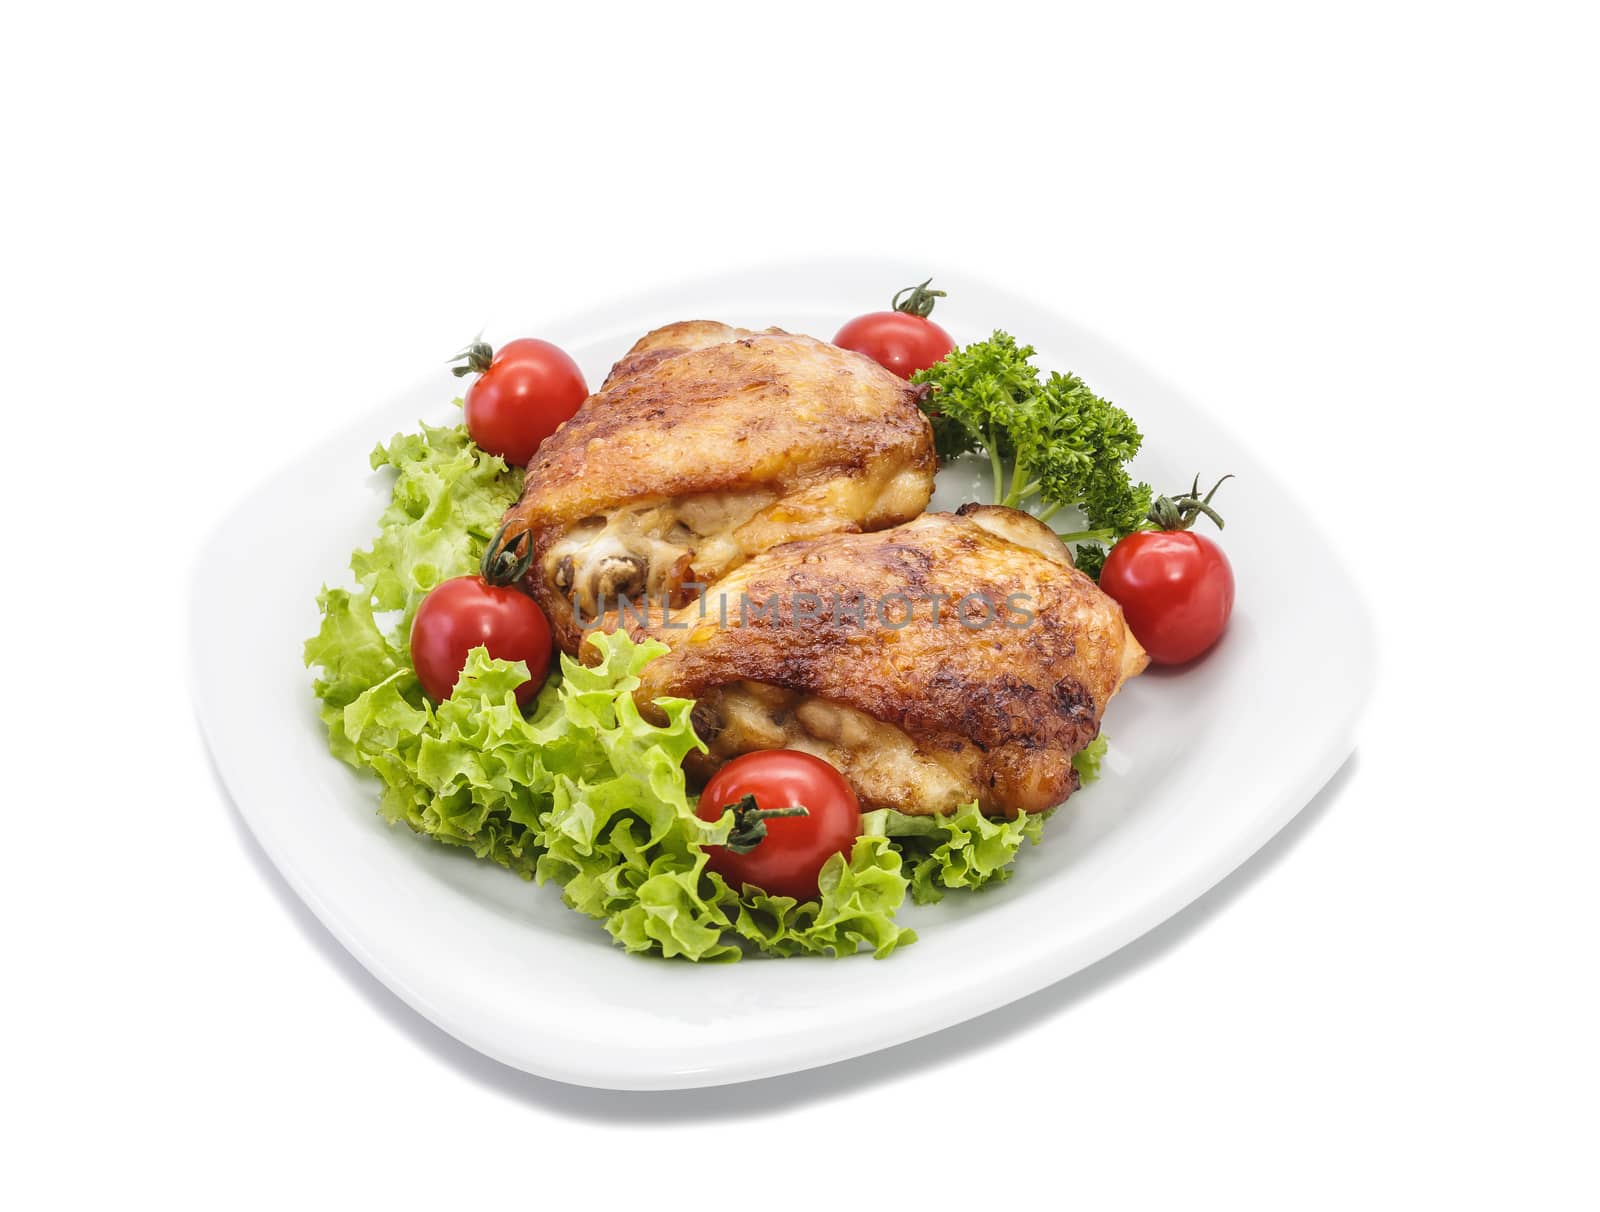 Fried chicken pieces on a plate with tomatoes, lettuce and parsley. Taken on a sheet of white plastic. Is not an isolate.